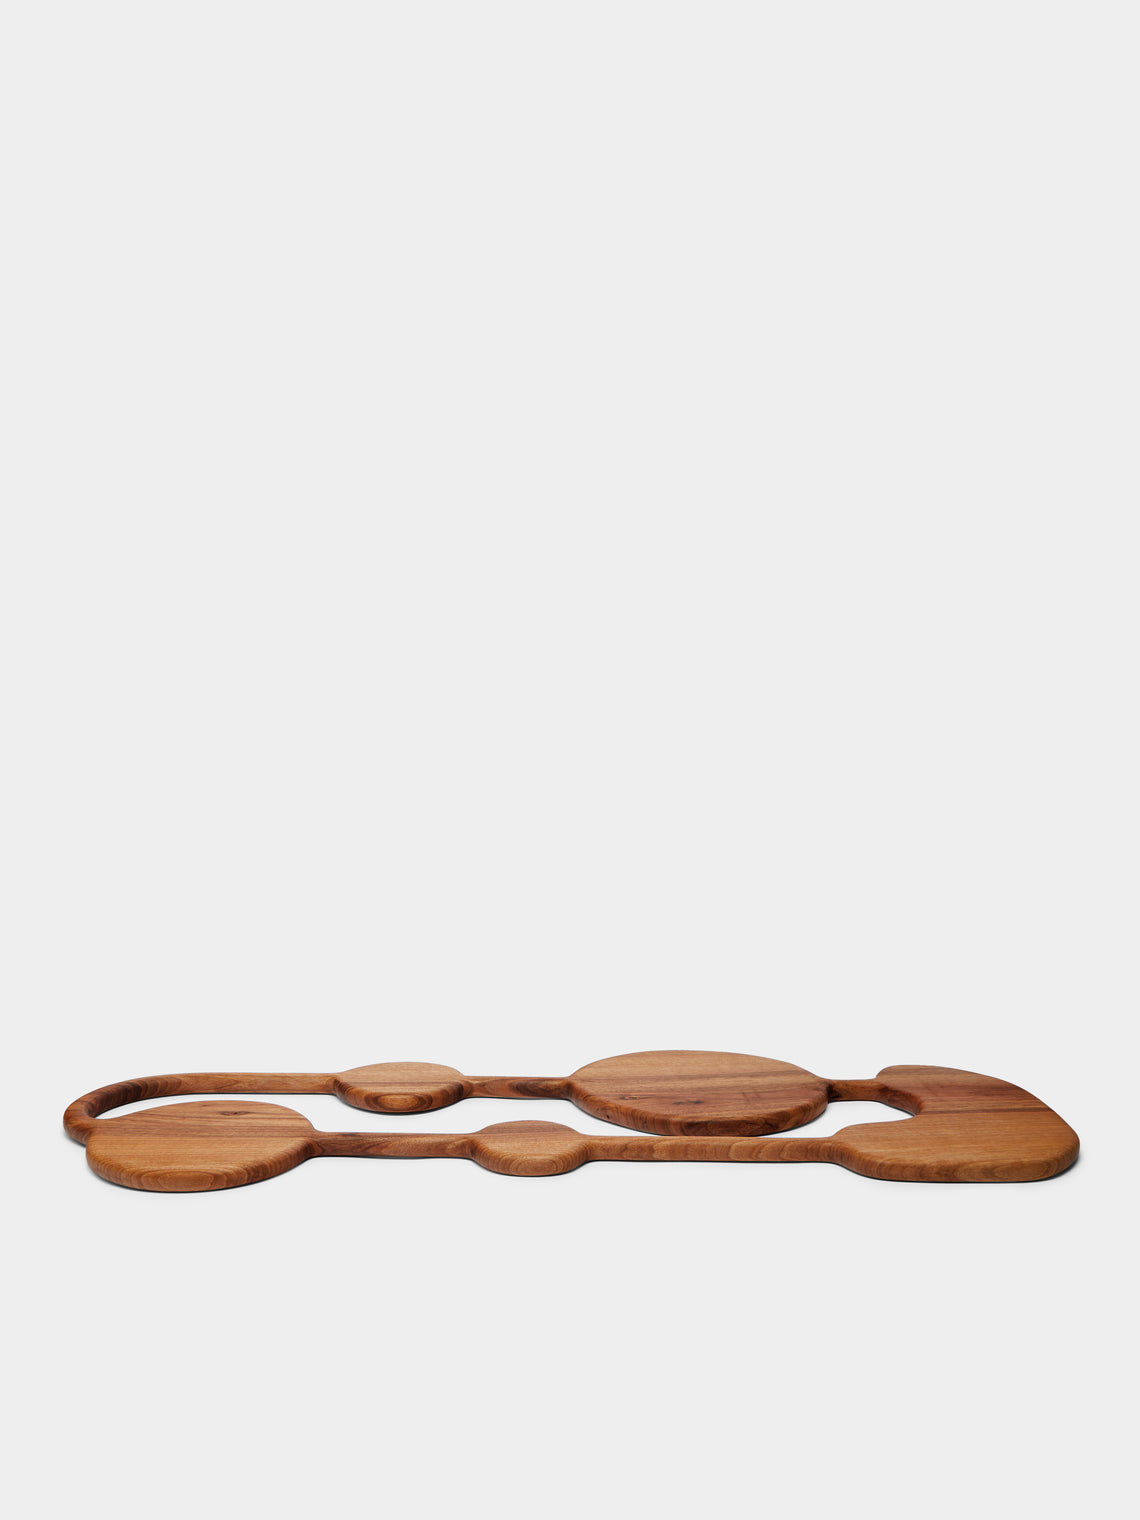 Lucas Castex - No. 8 Hand-Carved Oiled Walnut Serving Board -  - ABASK